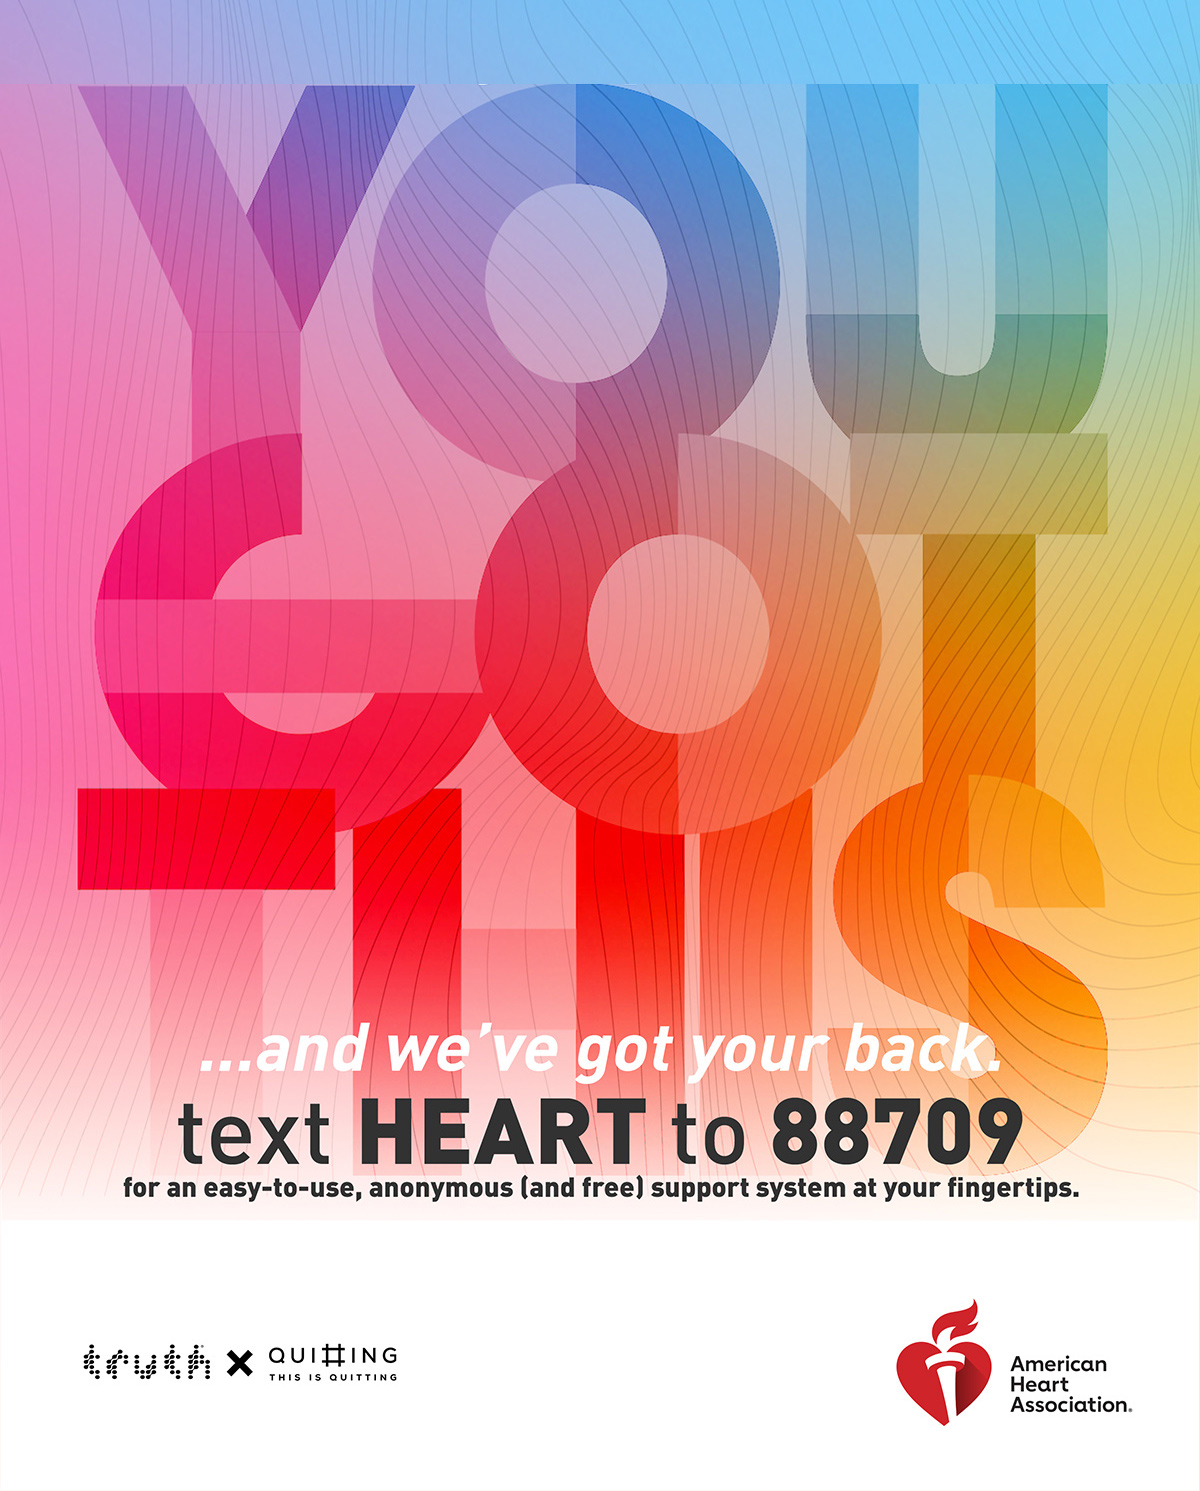 you got this. text HEART to 88709 for an easy-to-use and free anonymous support system at your fingertips